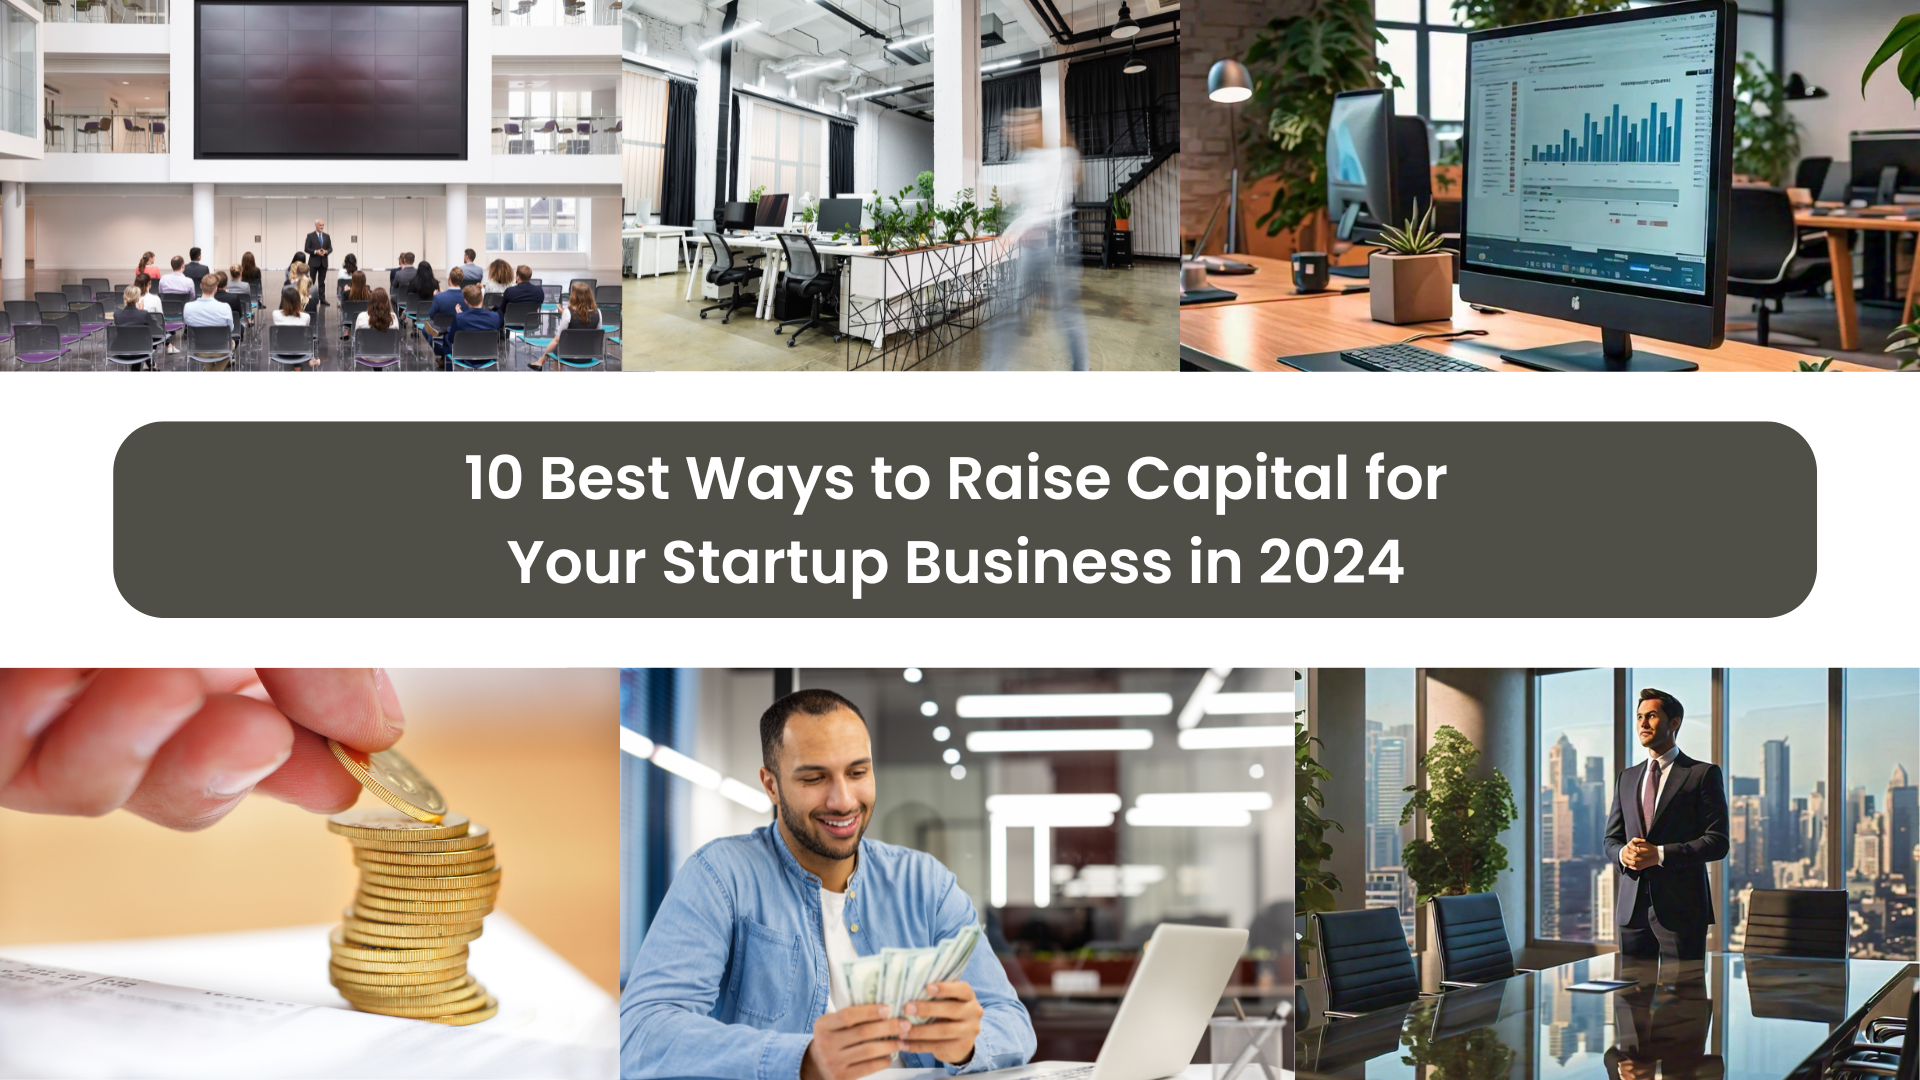 10 Best Ways to Raise Capital for Your Startup Business in 2024 